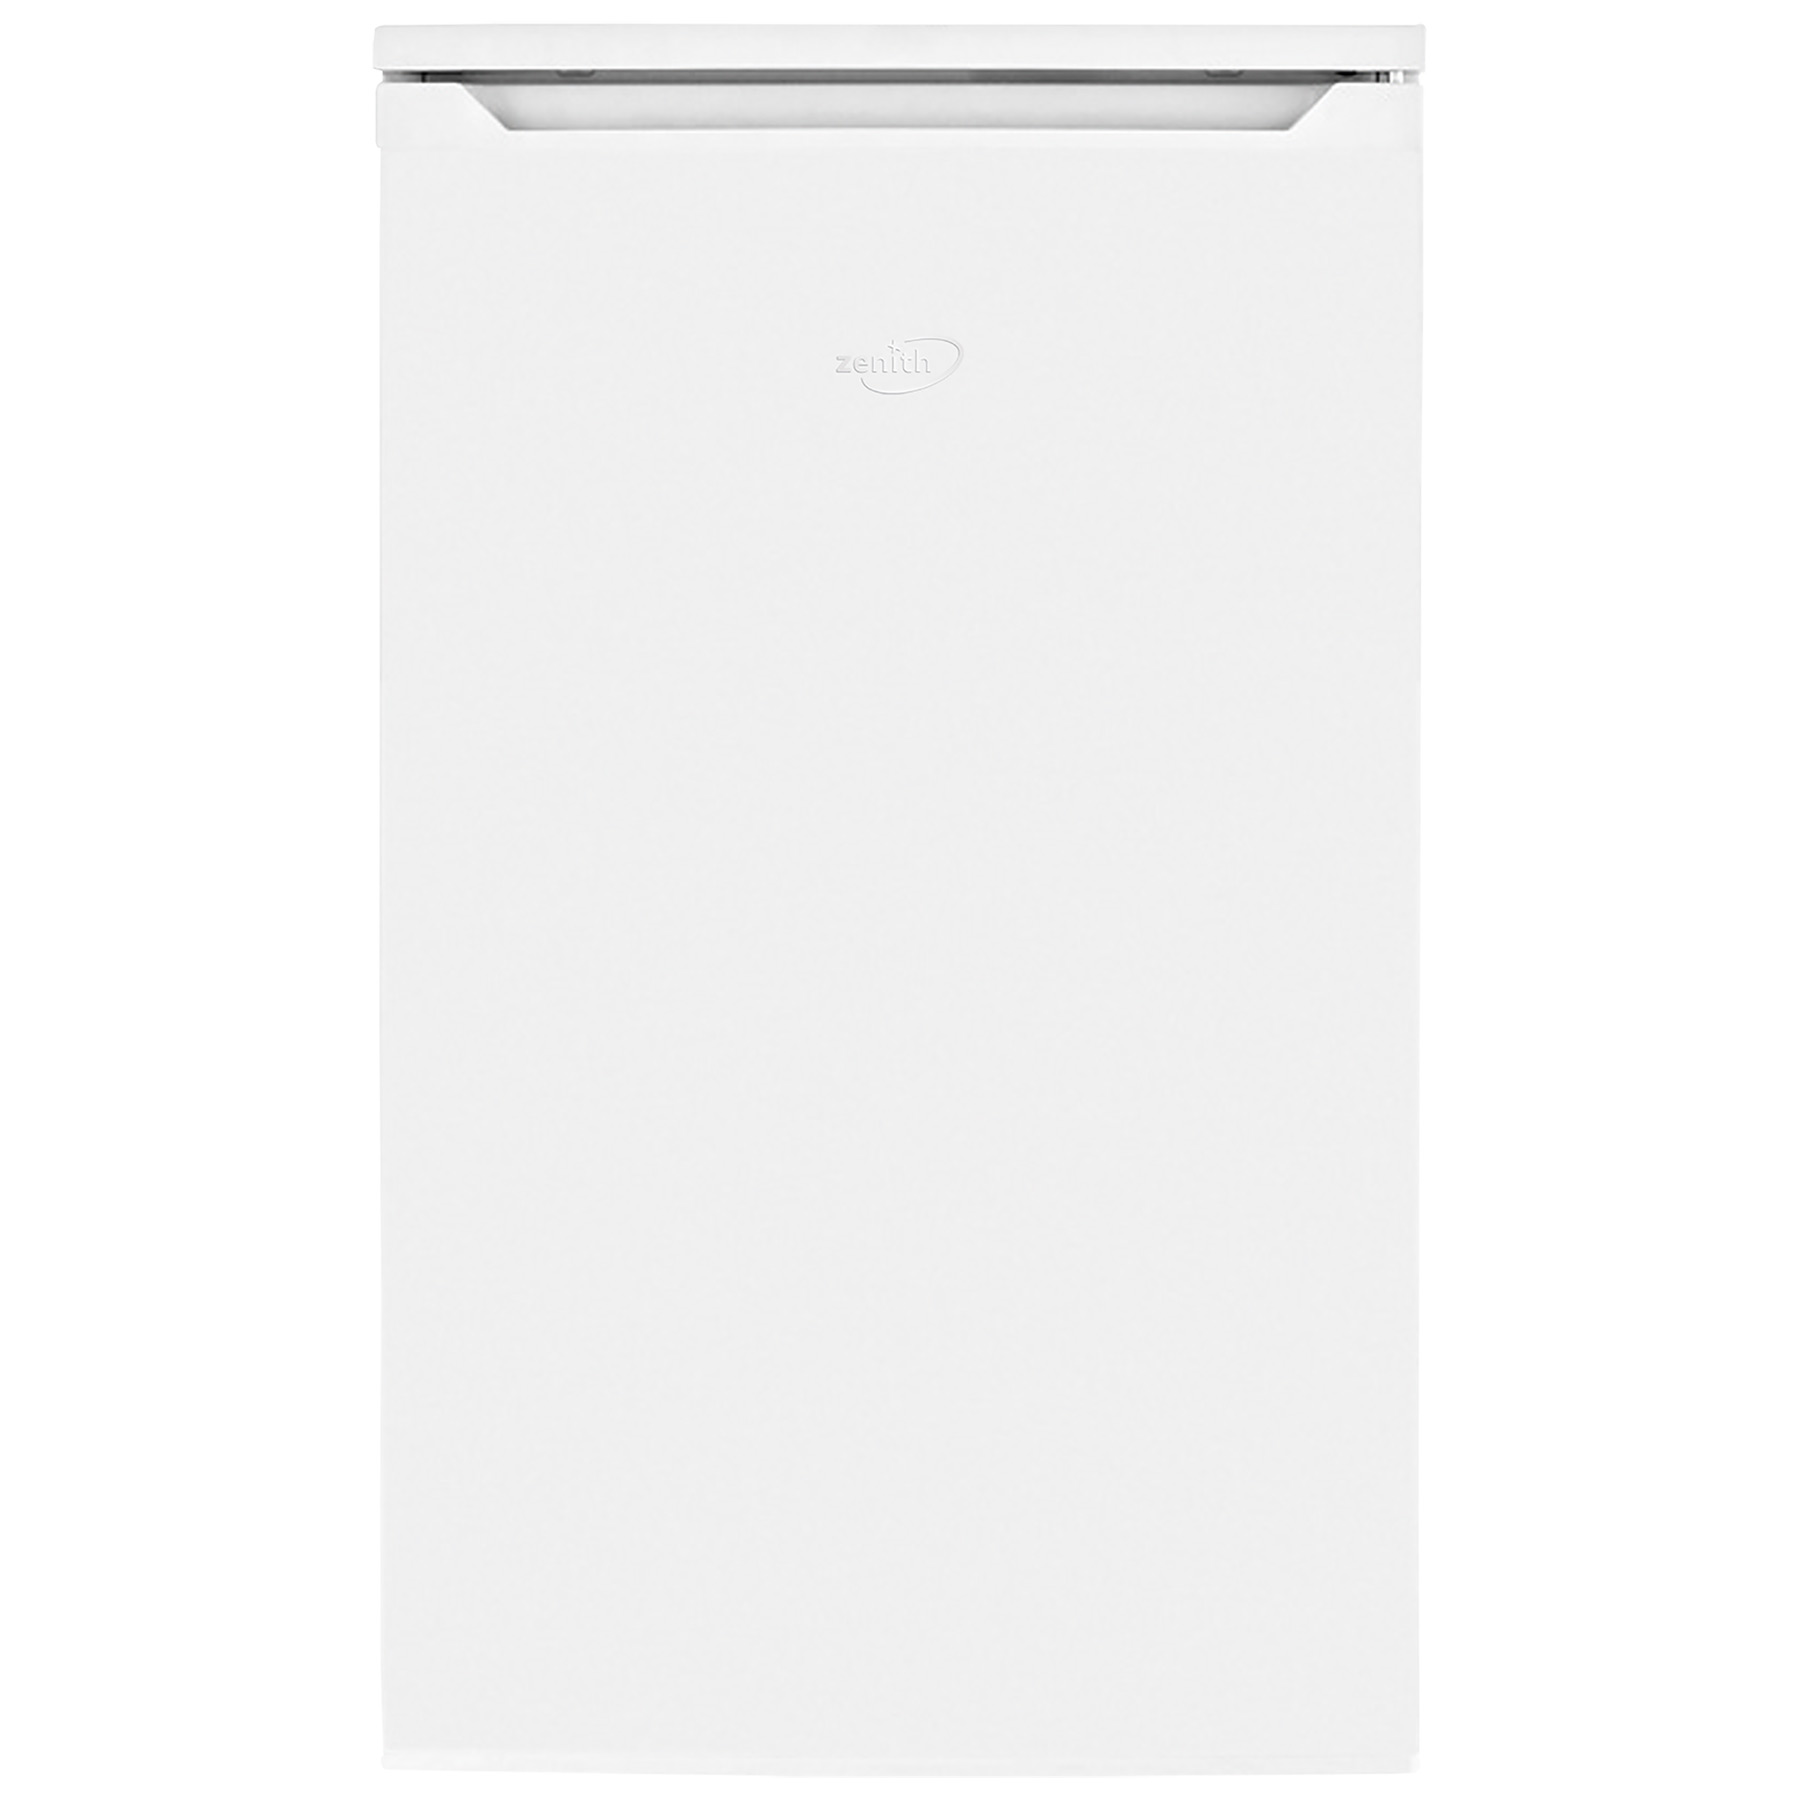 Image of Zenith ZFS4481W 48cm Undercounter Freezer in White E Rated 65L